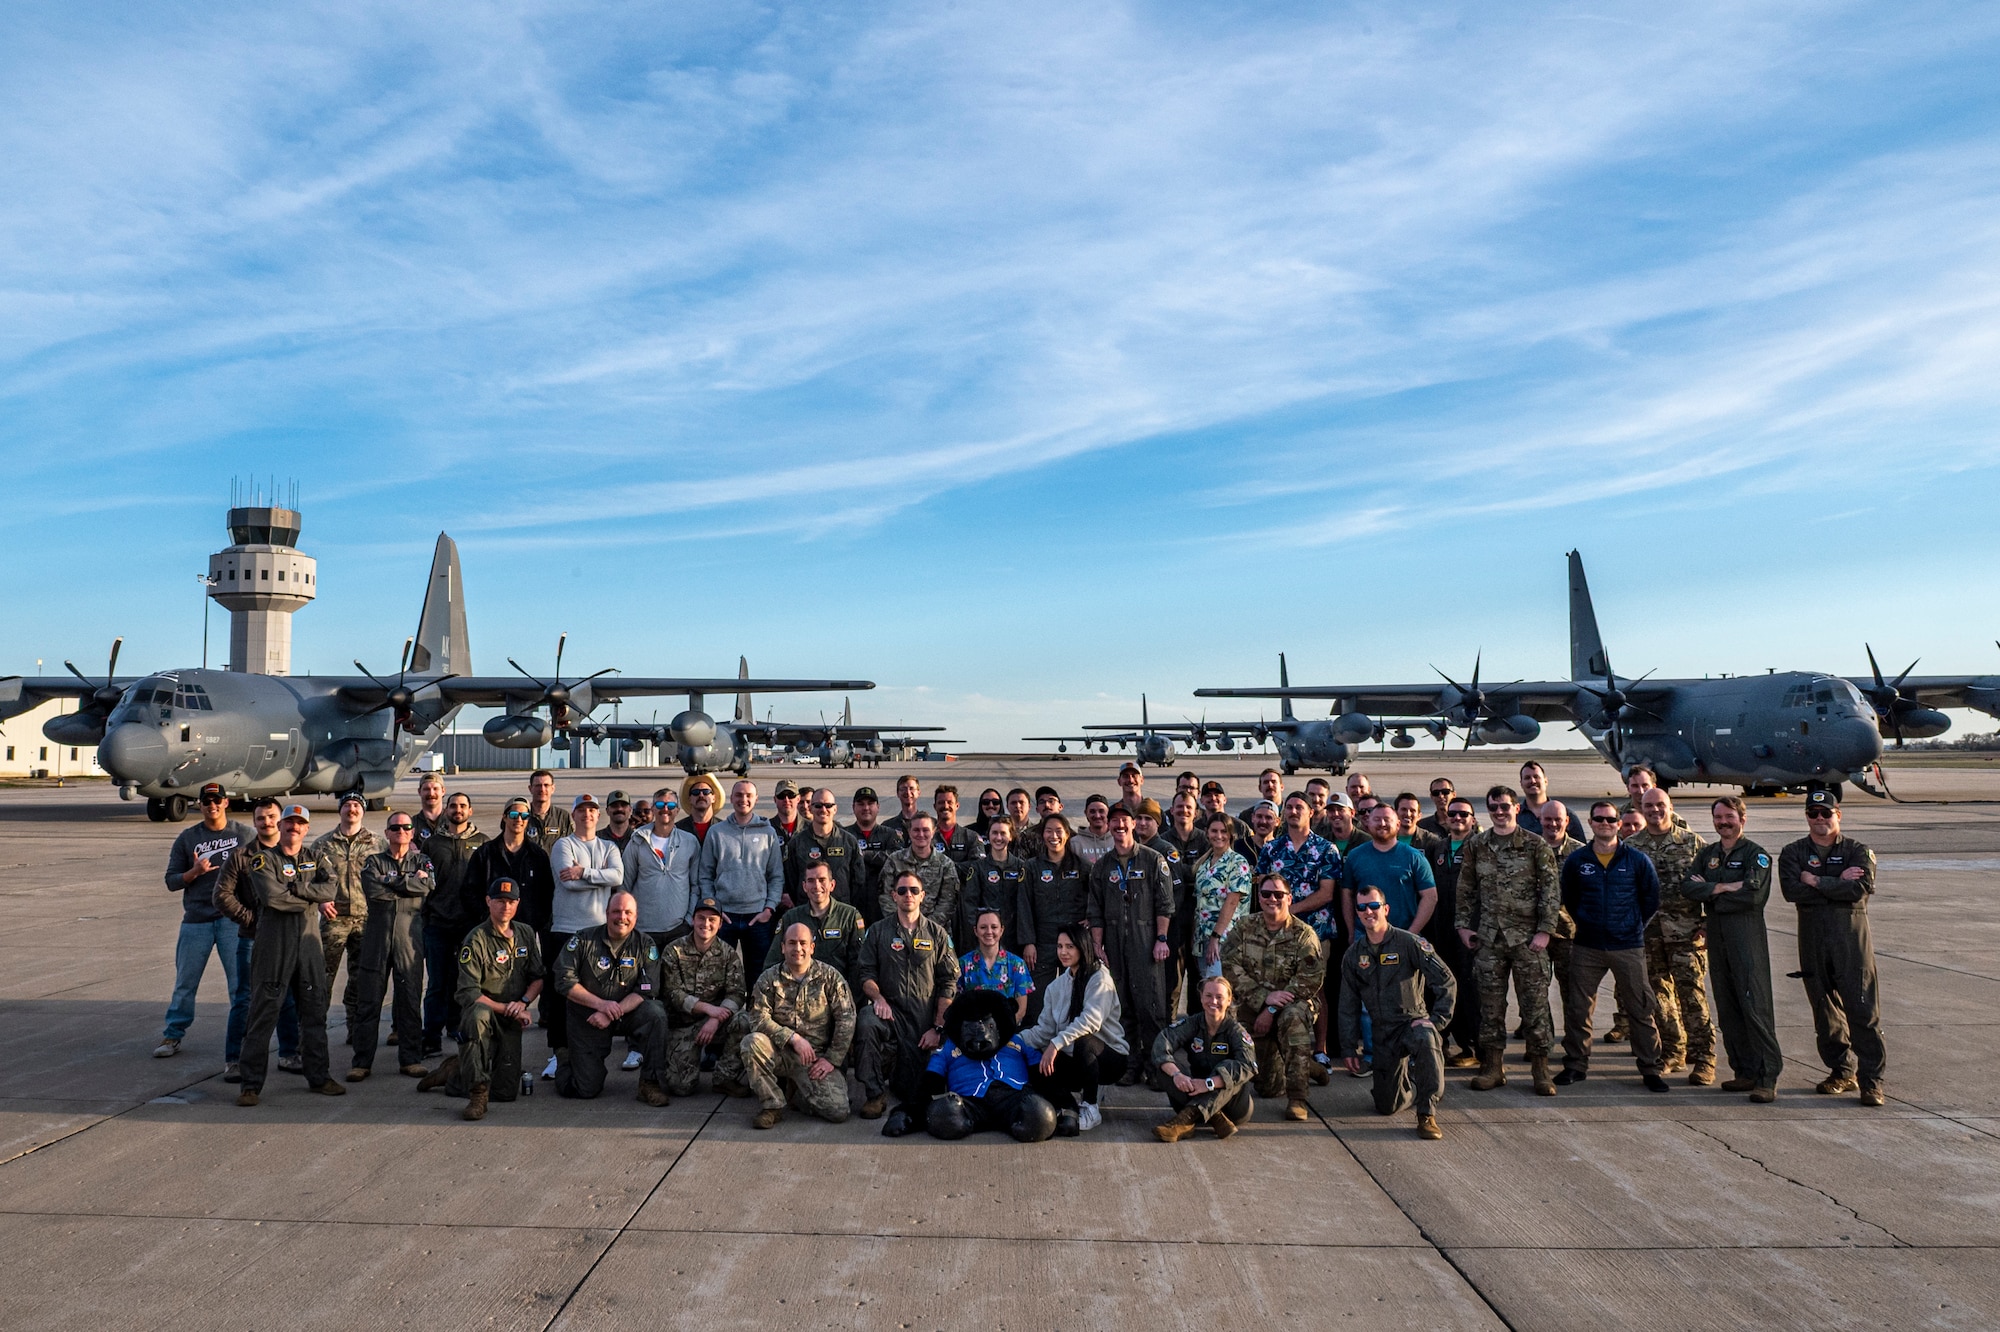 U.S. Air Force Airmen assigned to various rescue squadrons pose for a group photo at Salina Regional Airport, Kansas, March 28, 2024. After several days and multiple training scenarios, the 102nd Rescue Squadron claimed first place in the Rescue Rodeo, an event pitting active duty, Air National Guard, and Reserve rescue units against each other. (U.S. Air Force photo by Airman 1st Class Leonid Soubbotine)